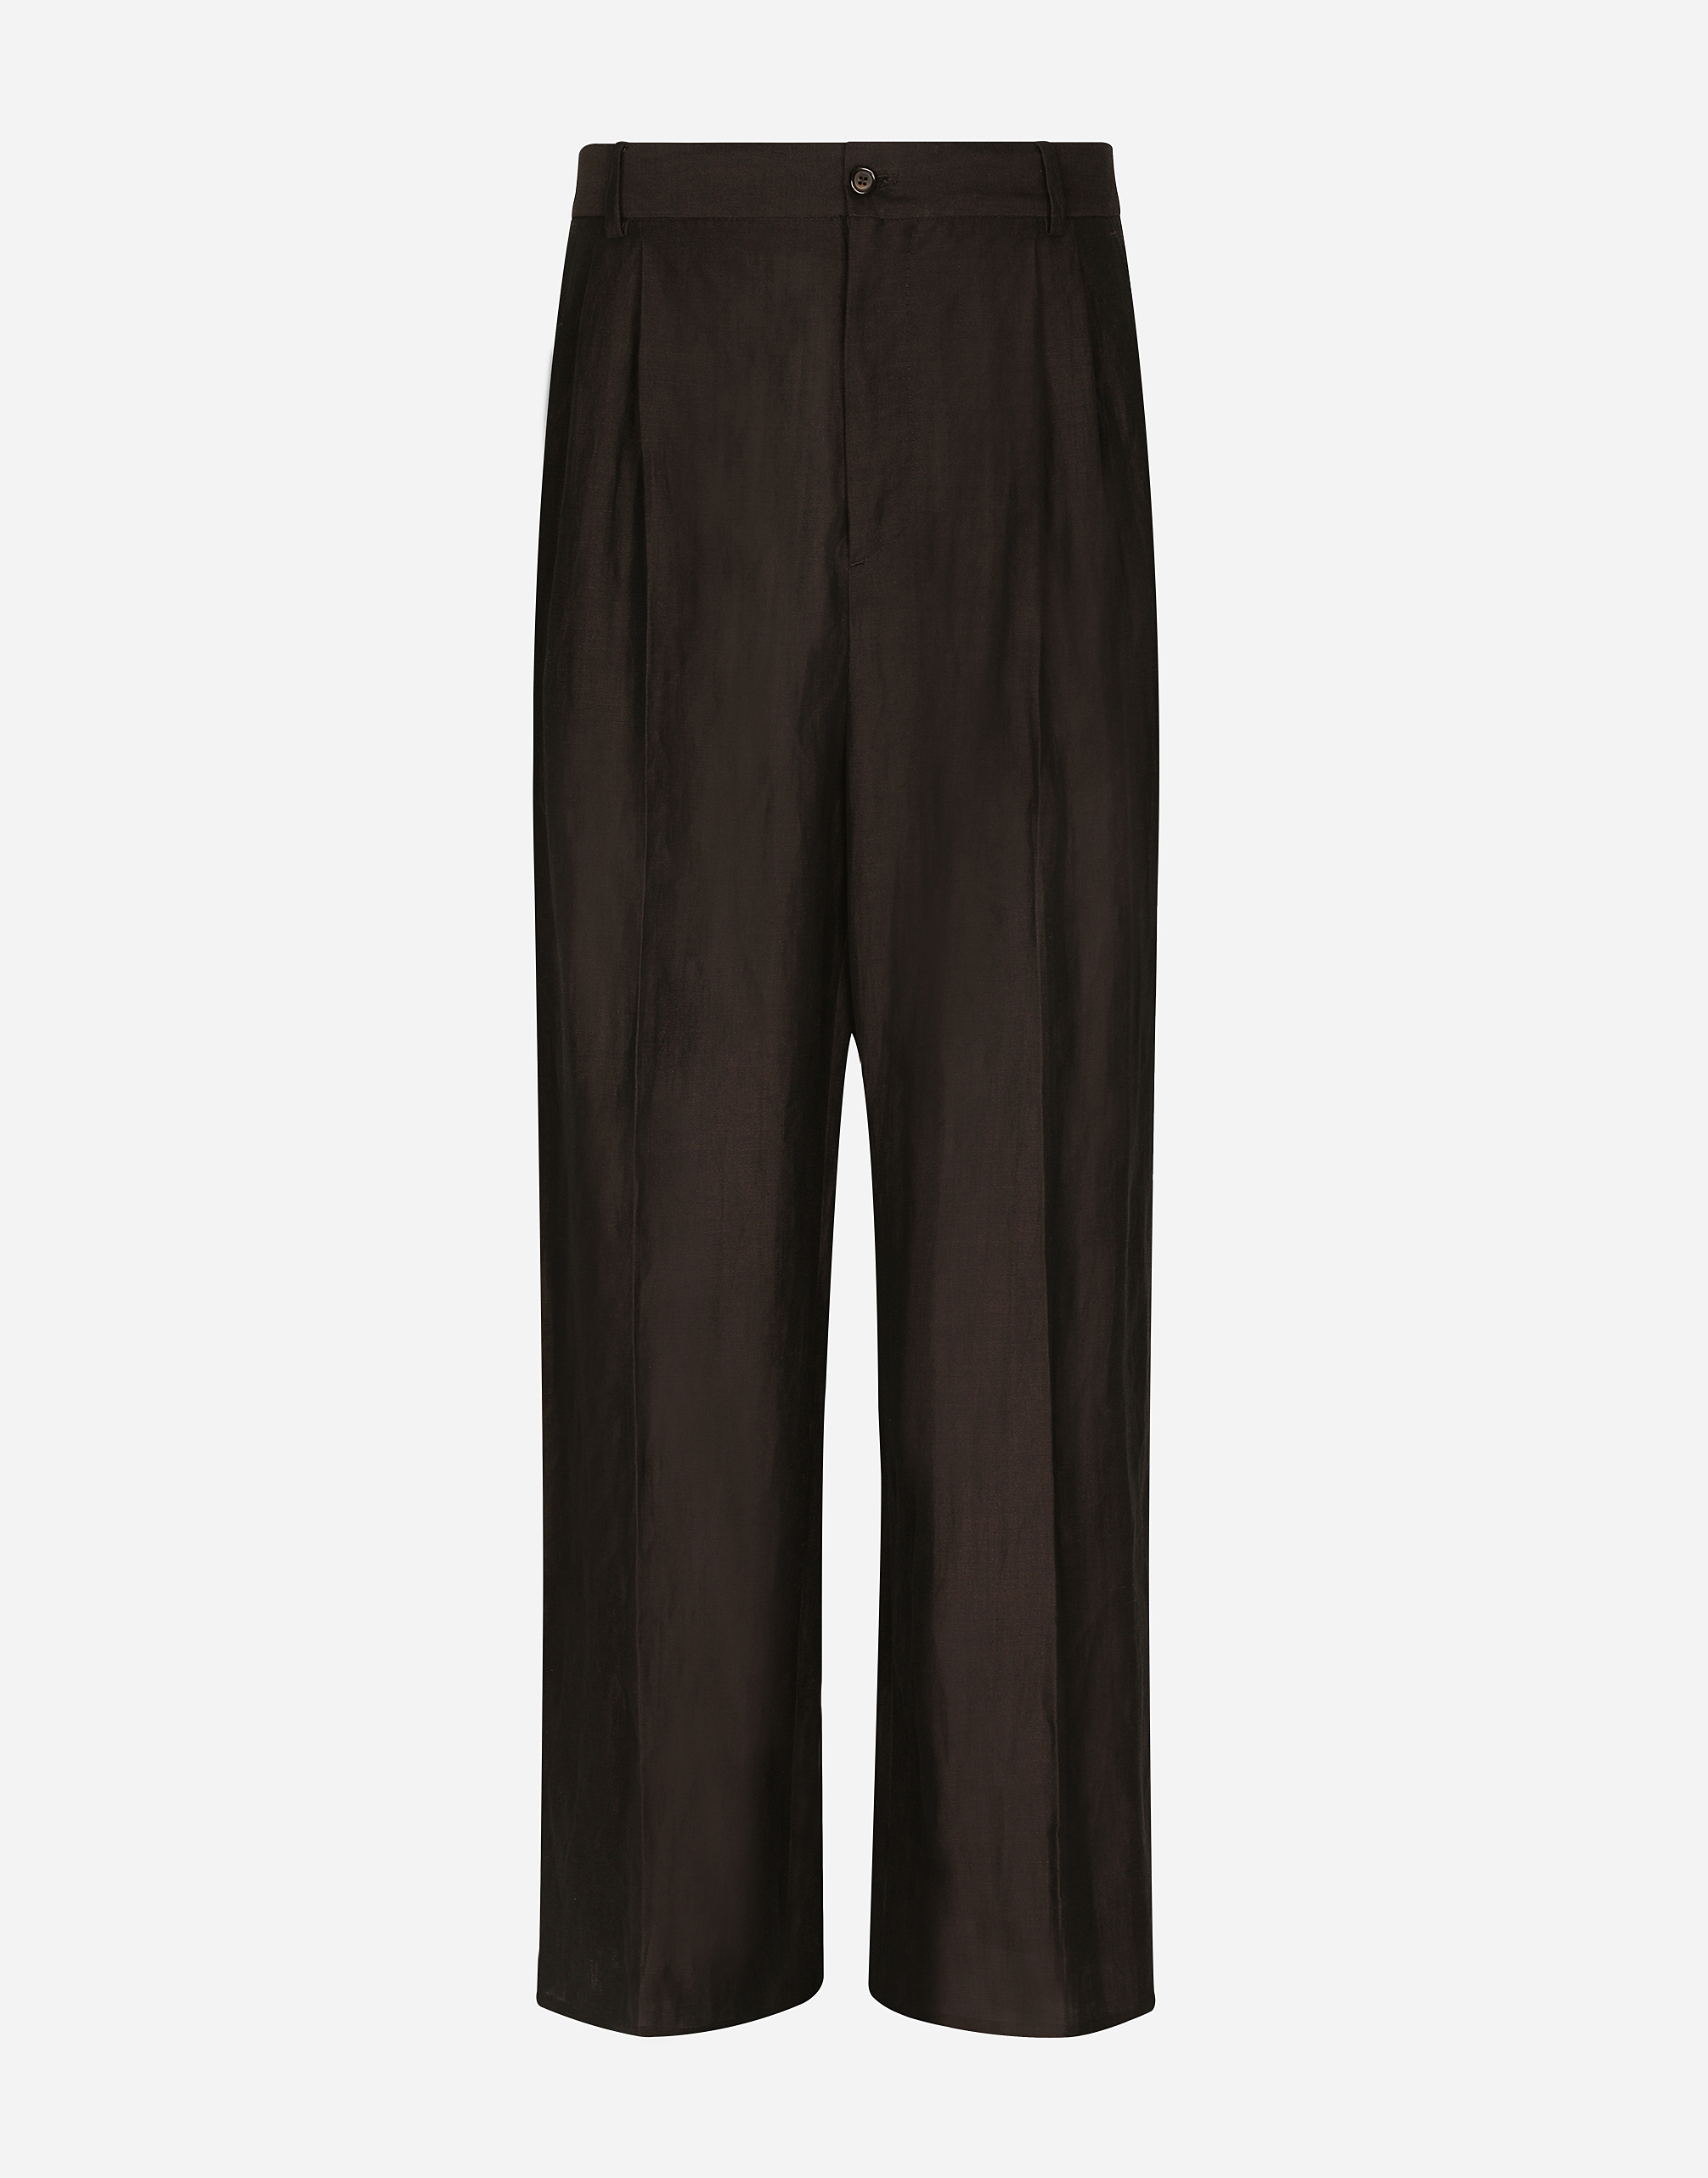 Tailored viscose and linen pants in Brown